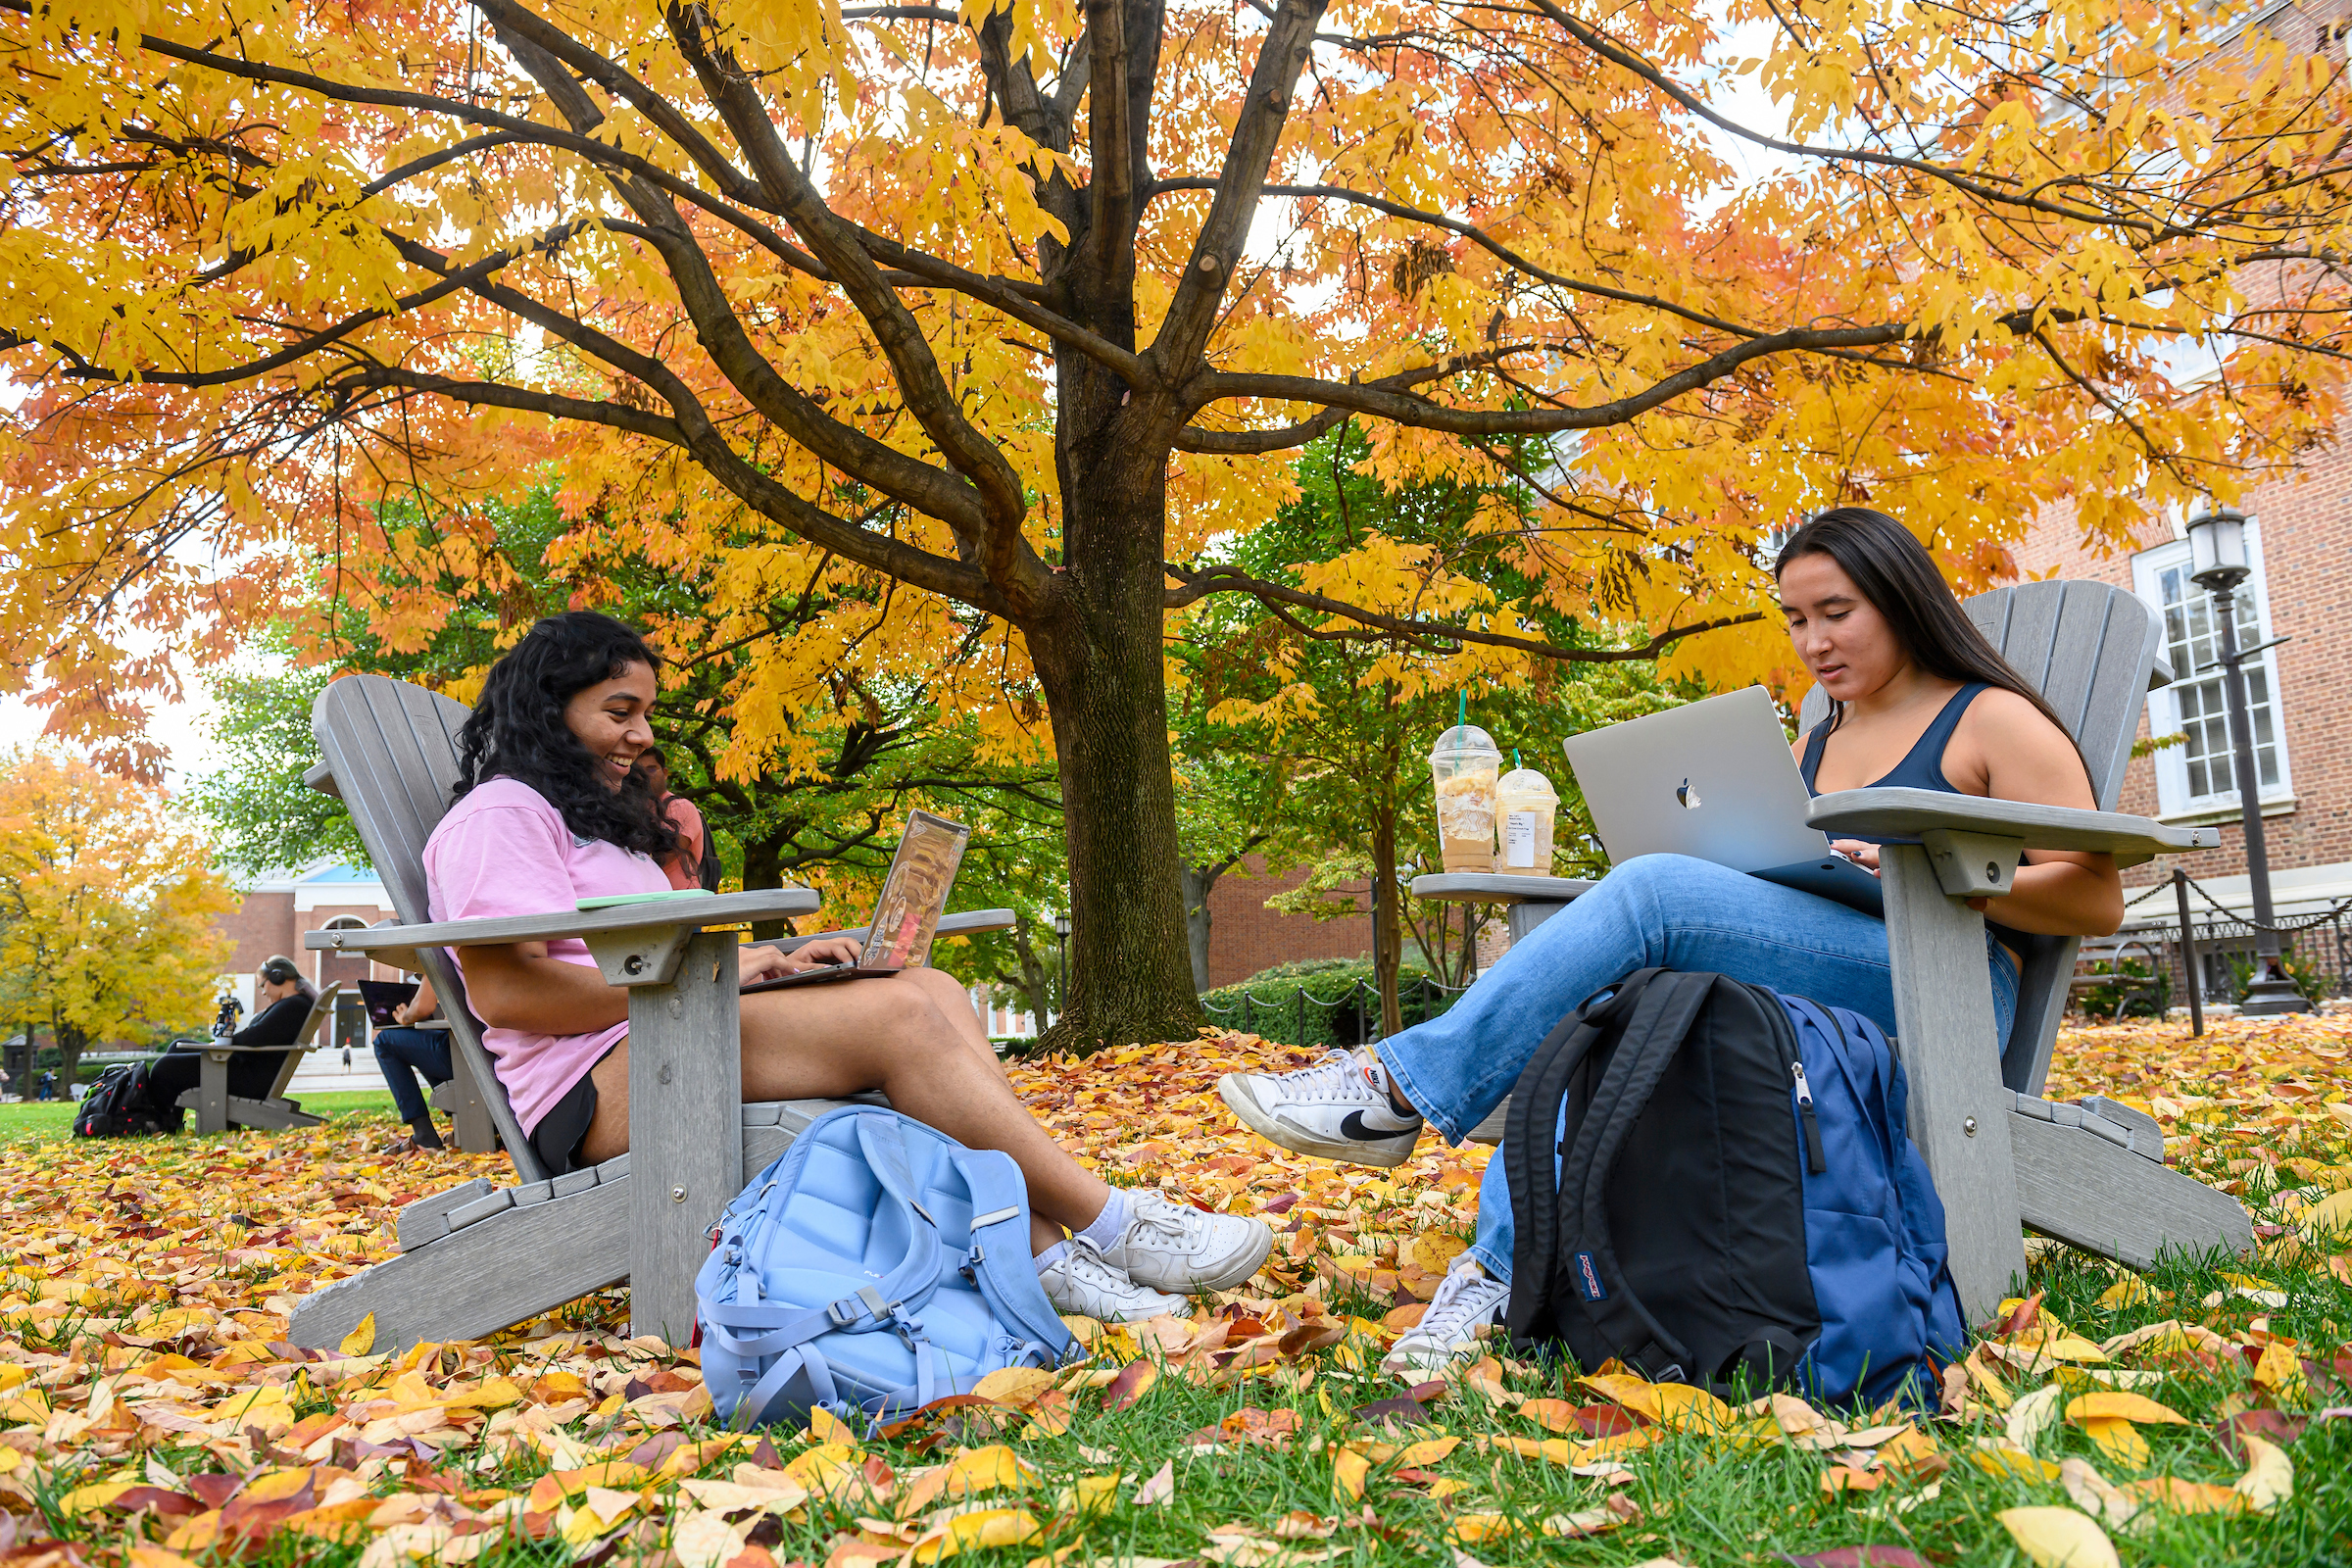 Students studying in Adirondak chairs surrounded by fall foliage